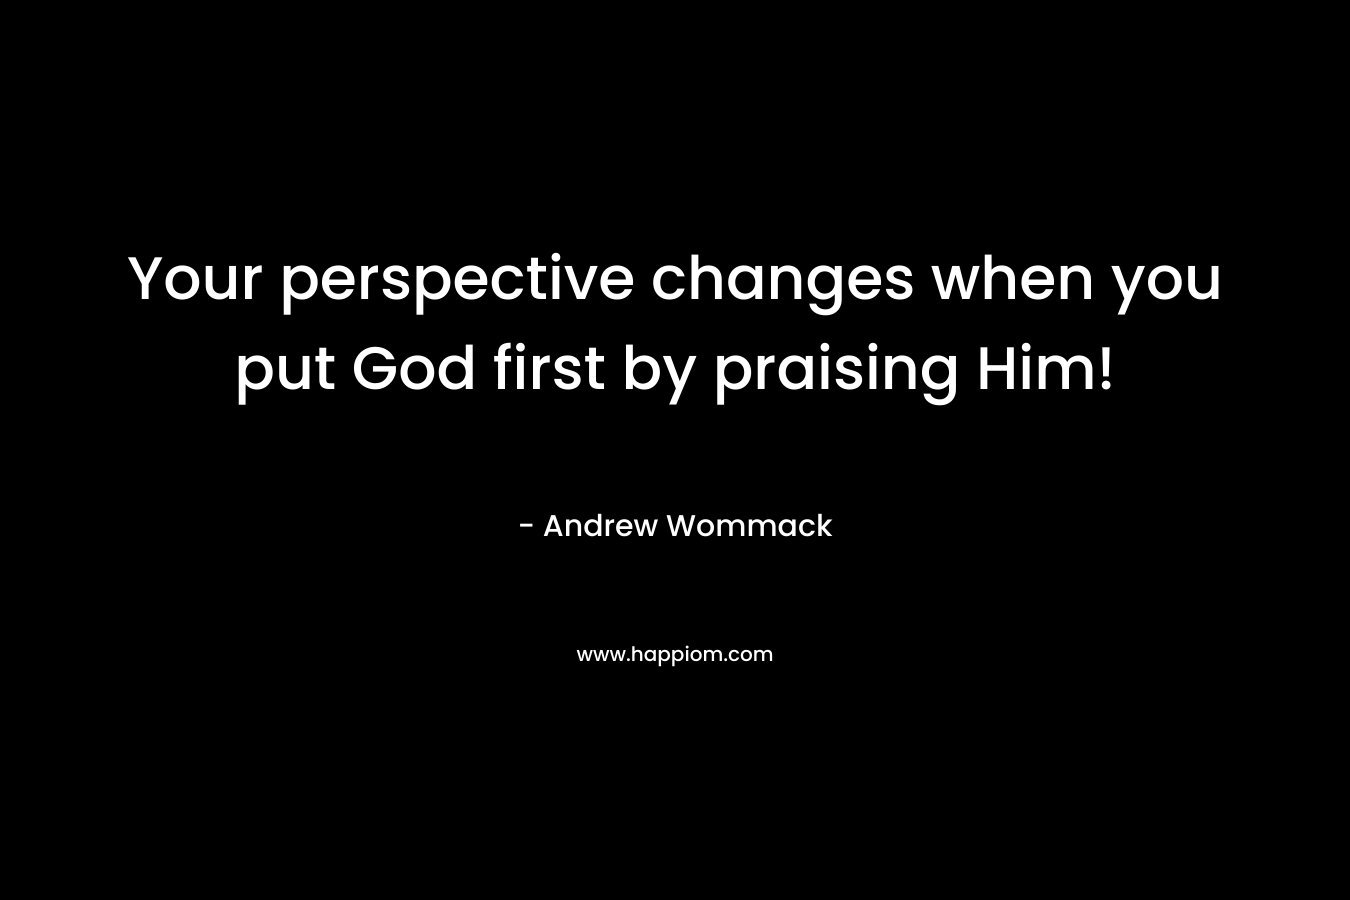 Your perspective changes when you put God first by praising Him!